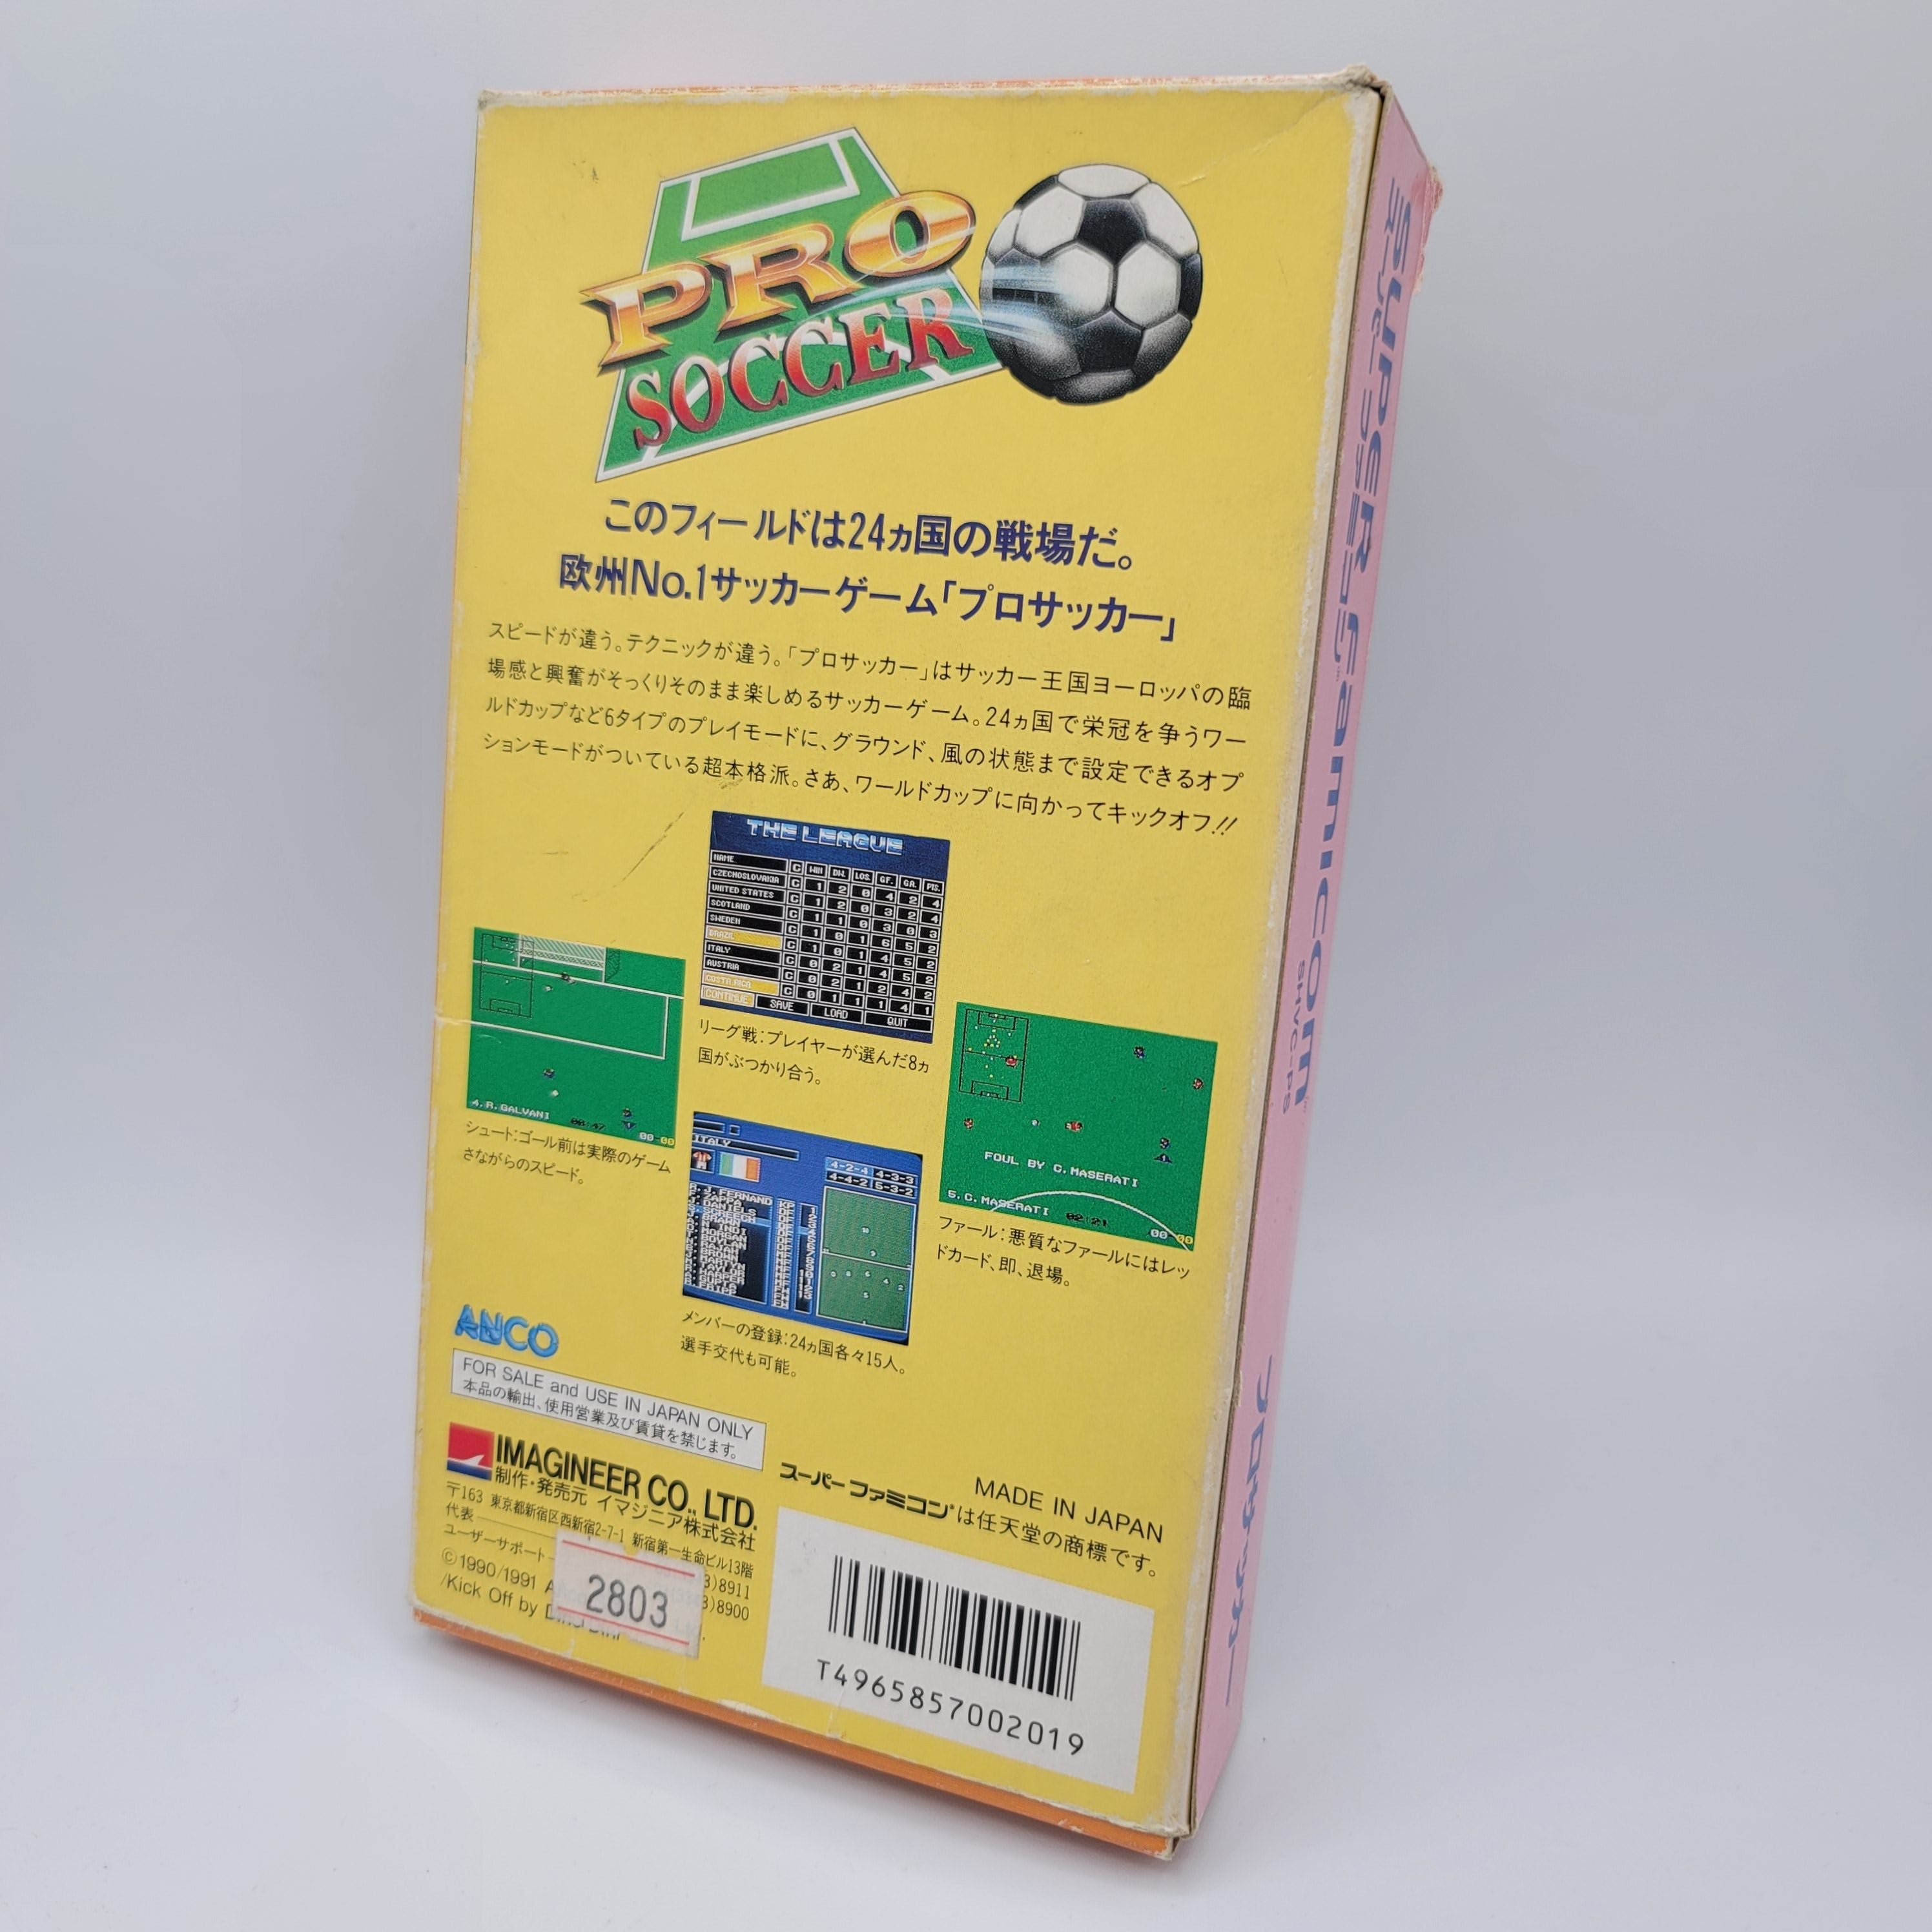 Super Famicom - World League Pro Soccer (Complete in Box / With Manual)